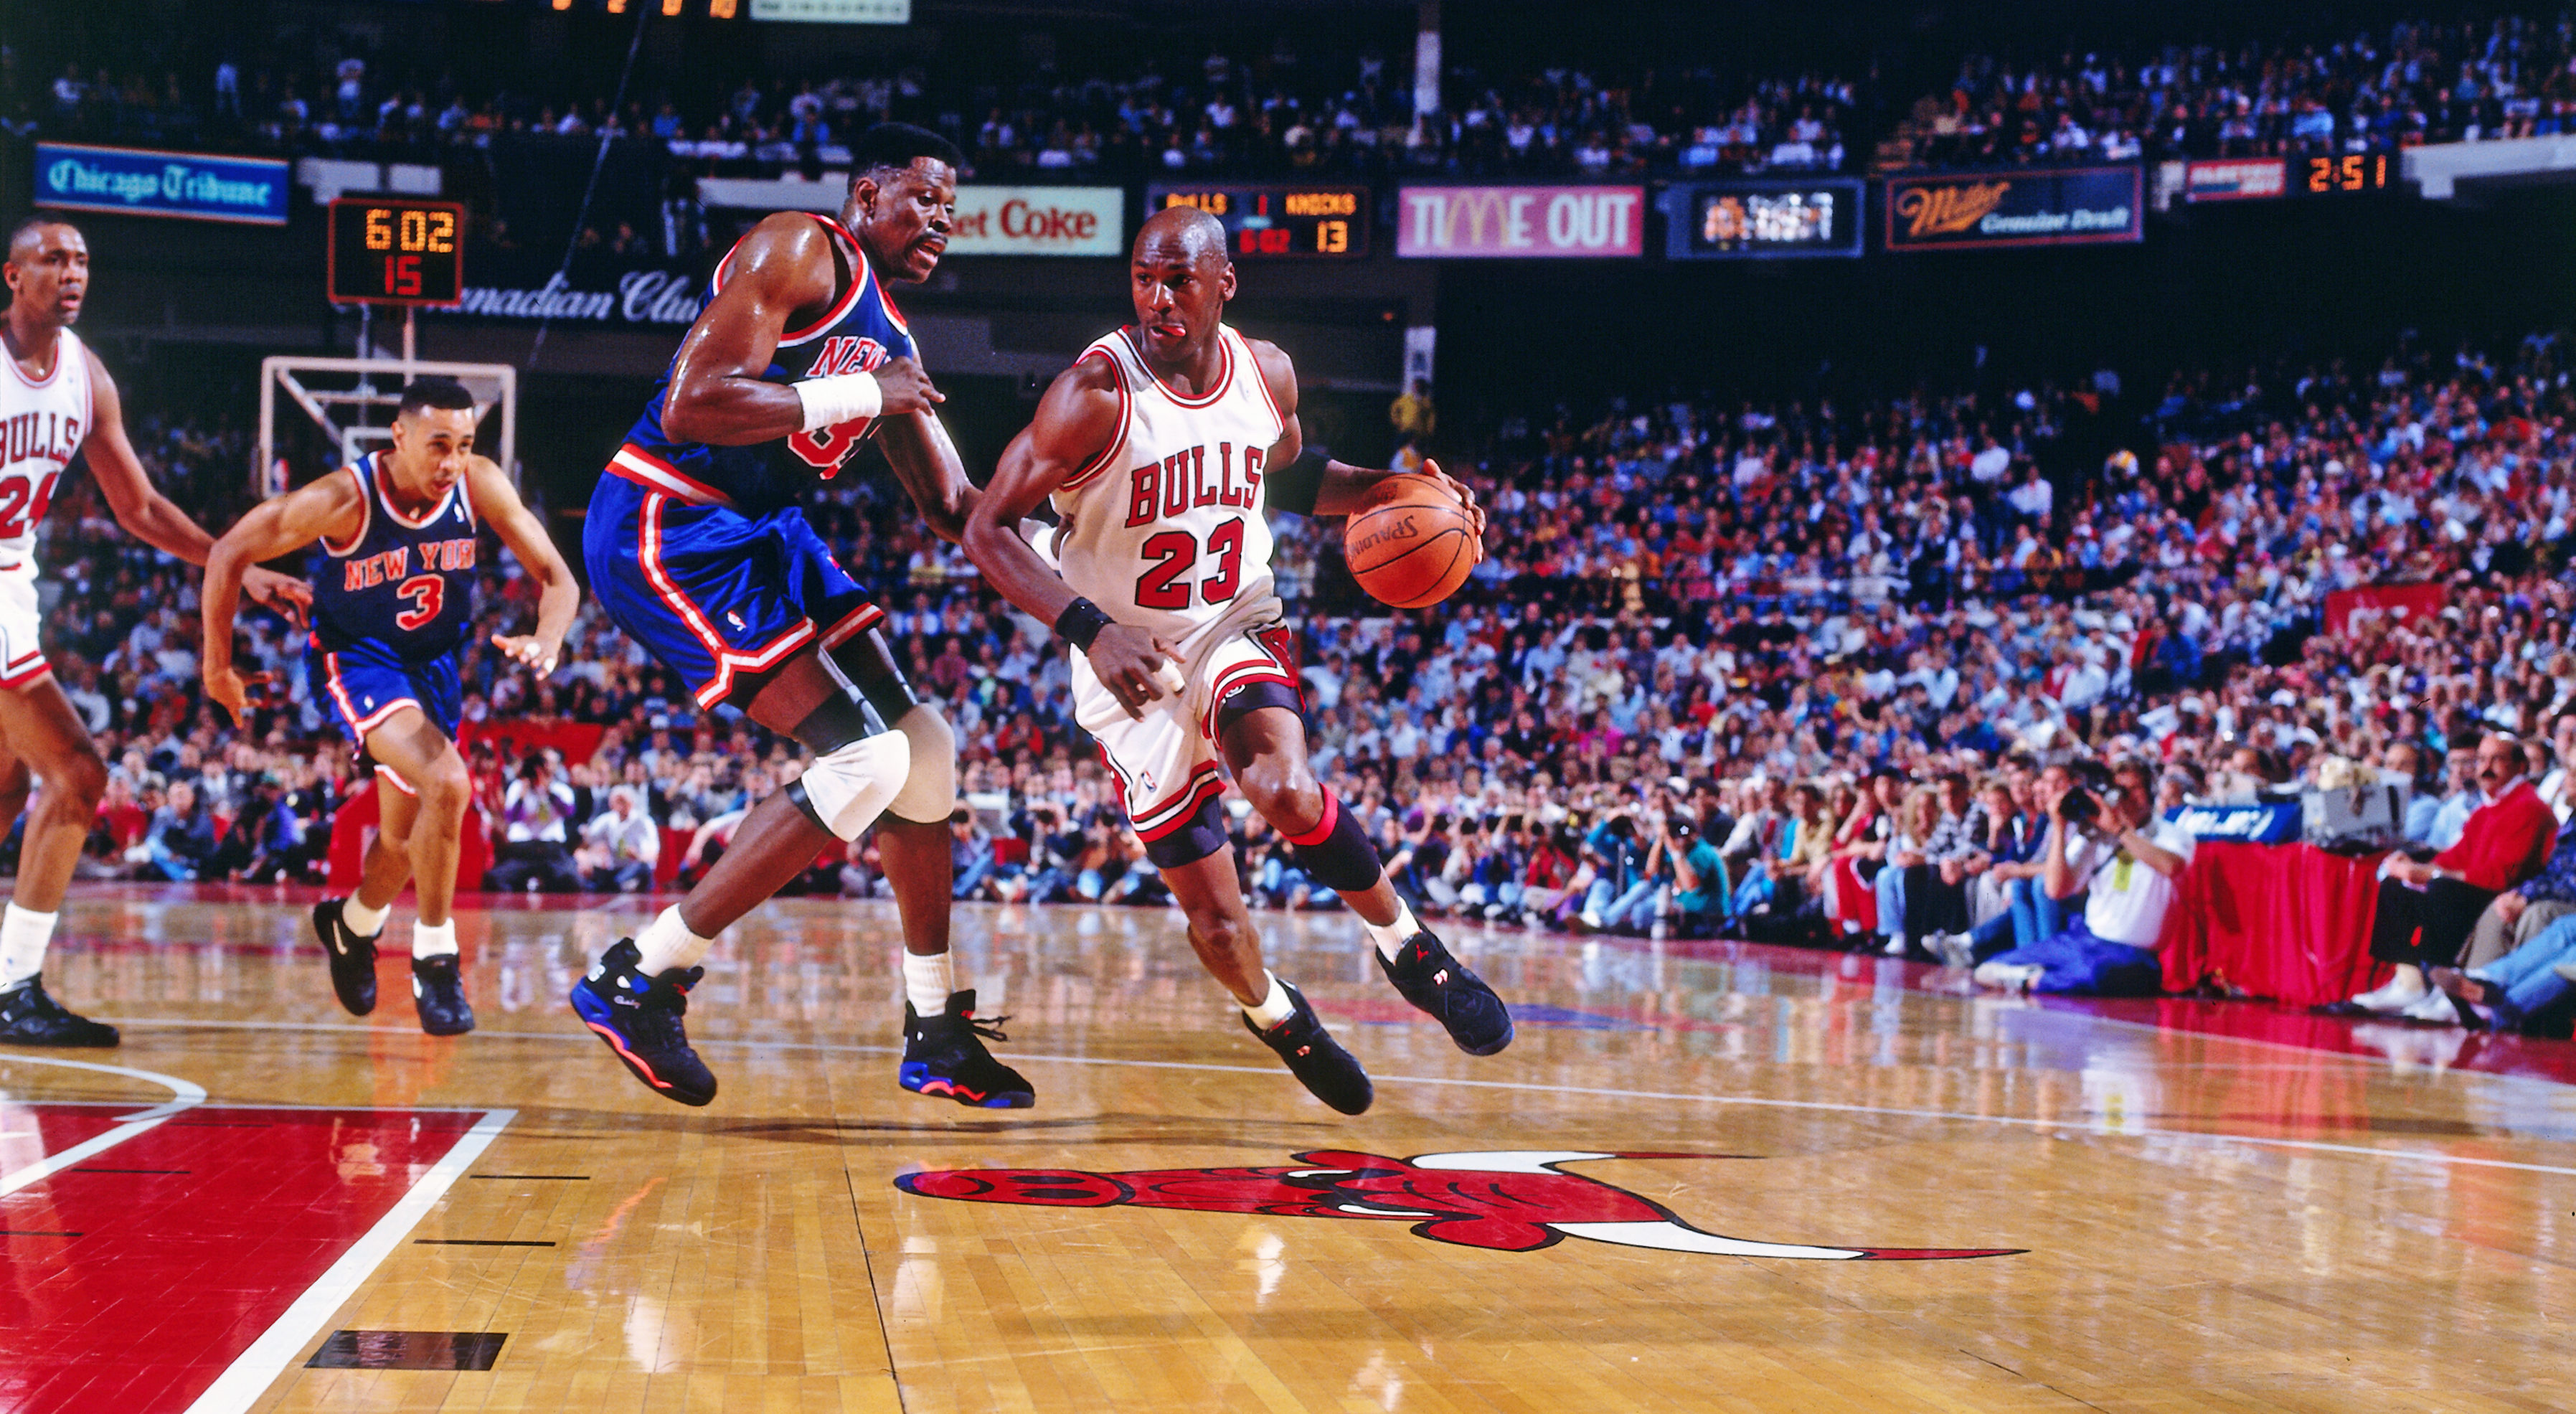 CHICAGO - MAY 31: Michael Jordan #23 of the Chicago Bulls dribbles against Patrick Ewing #33 of the New York Knicks during Game Four of the 1993 Eastern Conference Finals on May 31, 1993 at Chicago Stadium in Chicago, Illinois. NOTE TO USER: User expressly acknowledges and agrees that, by downloading and or using this photograph, User is consenting to the terms and conditions of the Getty Images License Agreement. Mandatory Copyright Notice: Copyright 1993 NBAE (Photo by Nathaniel S. Butler/NBAE via Getty Images)